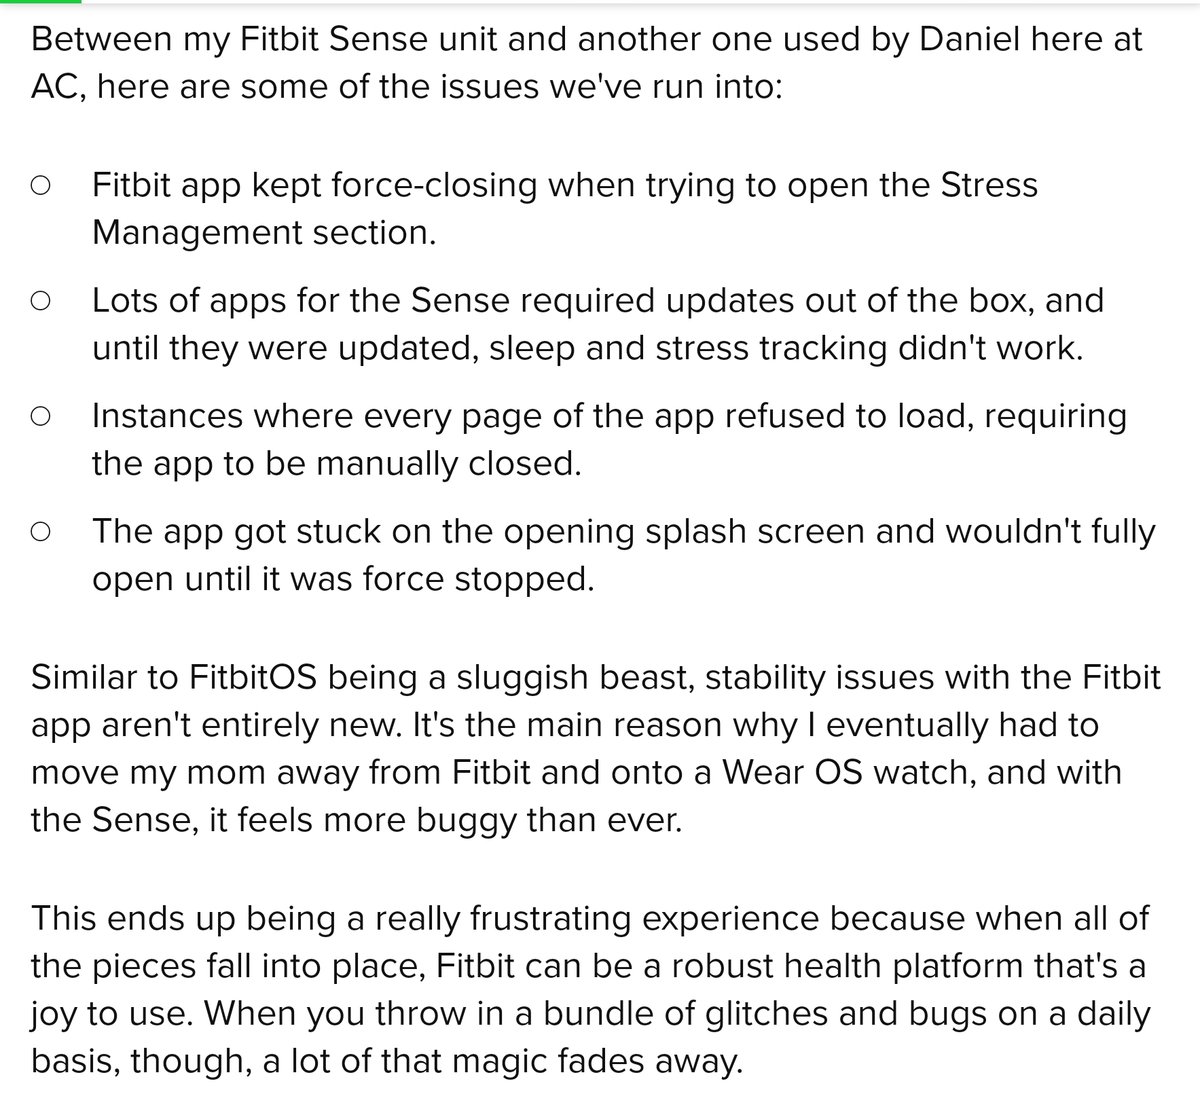 The software on the Fitbit Sense watch itself is slow and buggy in my experience just using it for a few days. I found this review which also has a similar opinion.  https://www.androidcentral.com/fitbit-sense-review